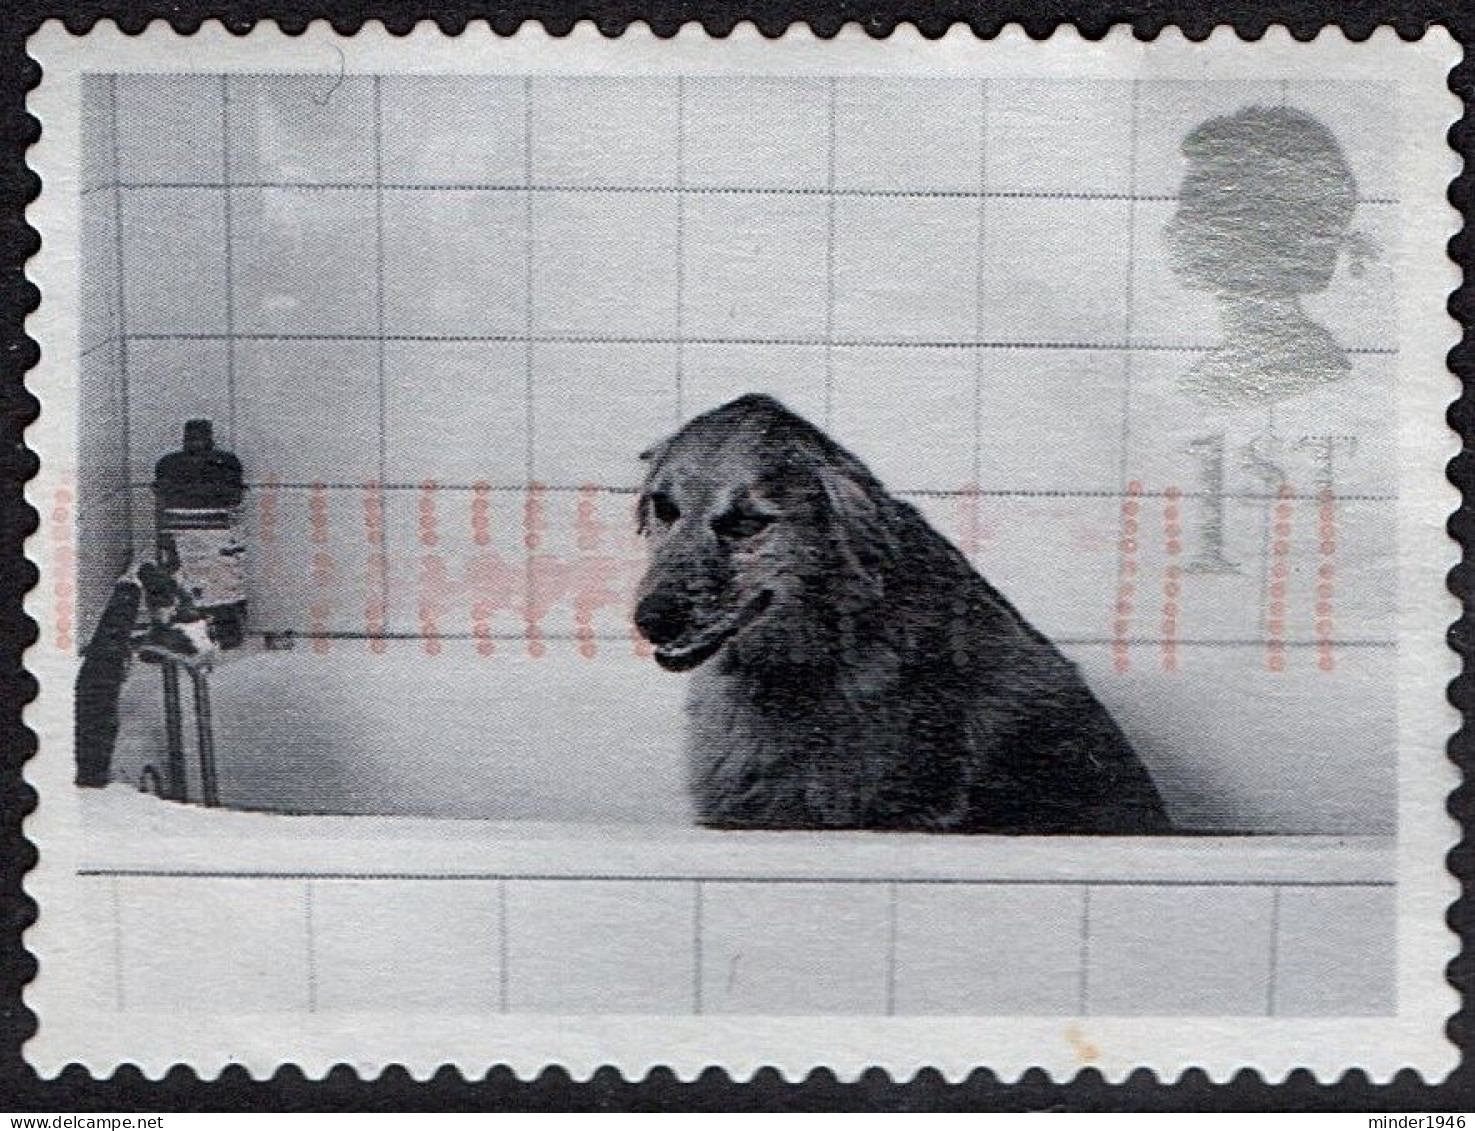 GREAT BRITAIN 2001 QEII 1st Black & Grey, Cats & Dogs-Dog In Bath SG2188 Used - Used Stamps